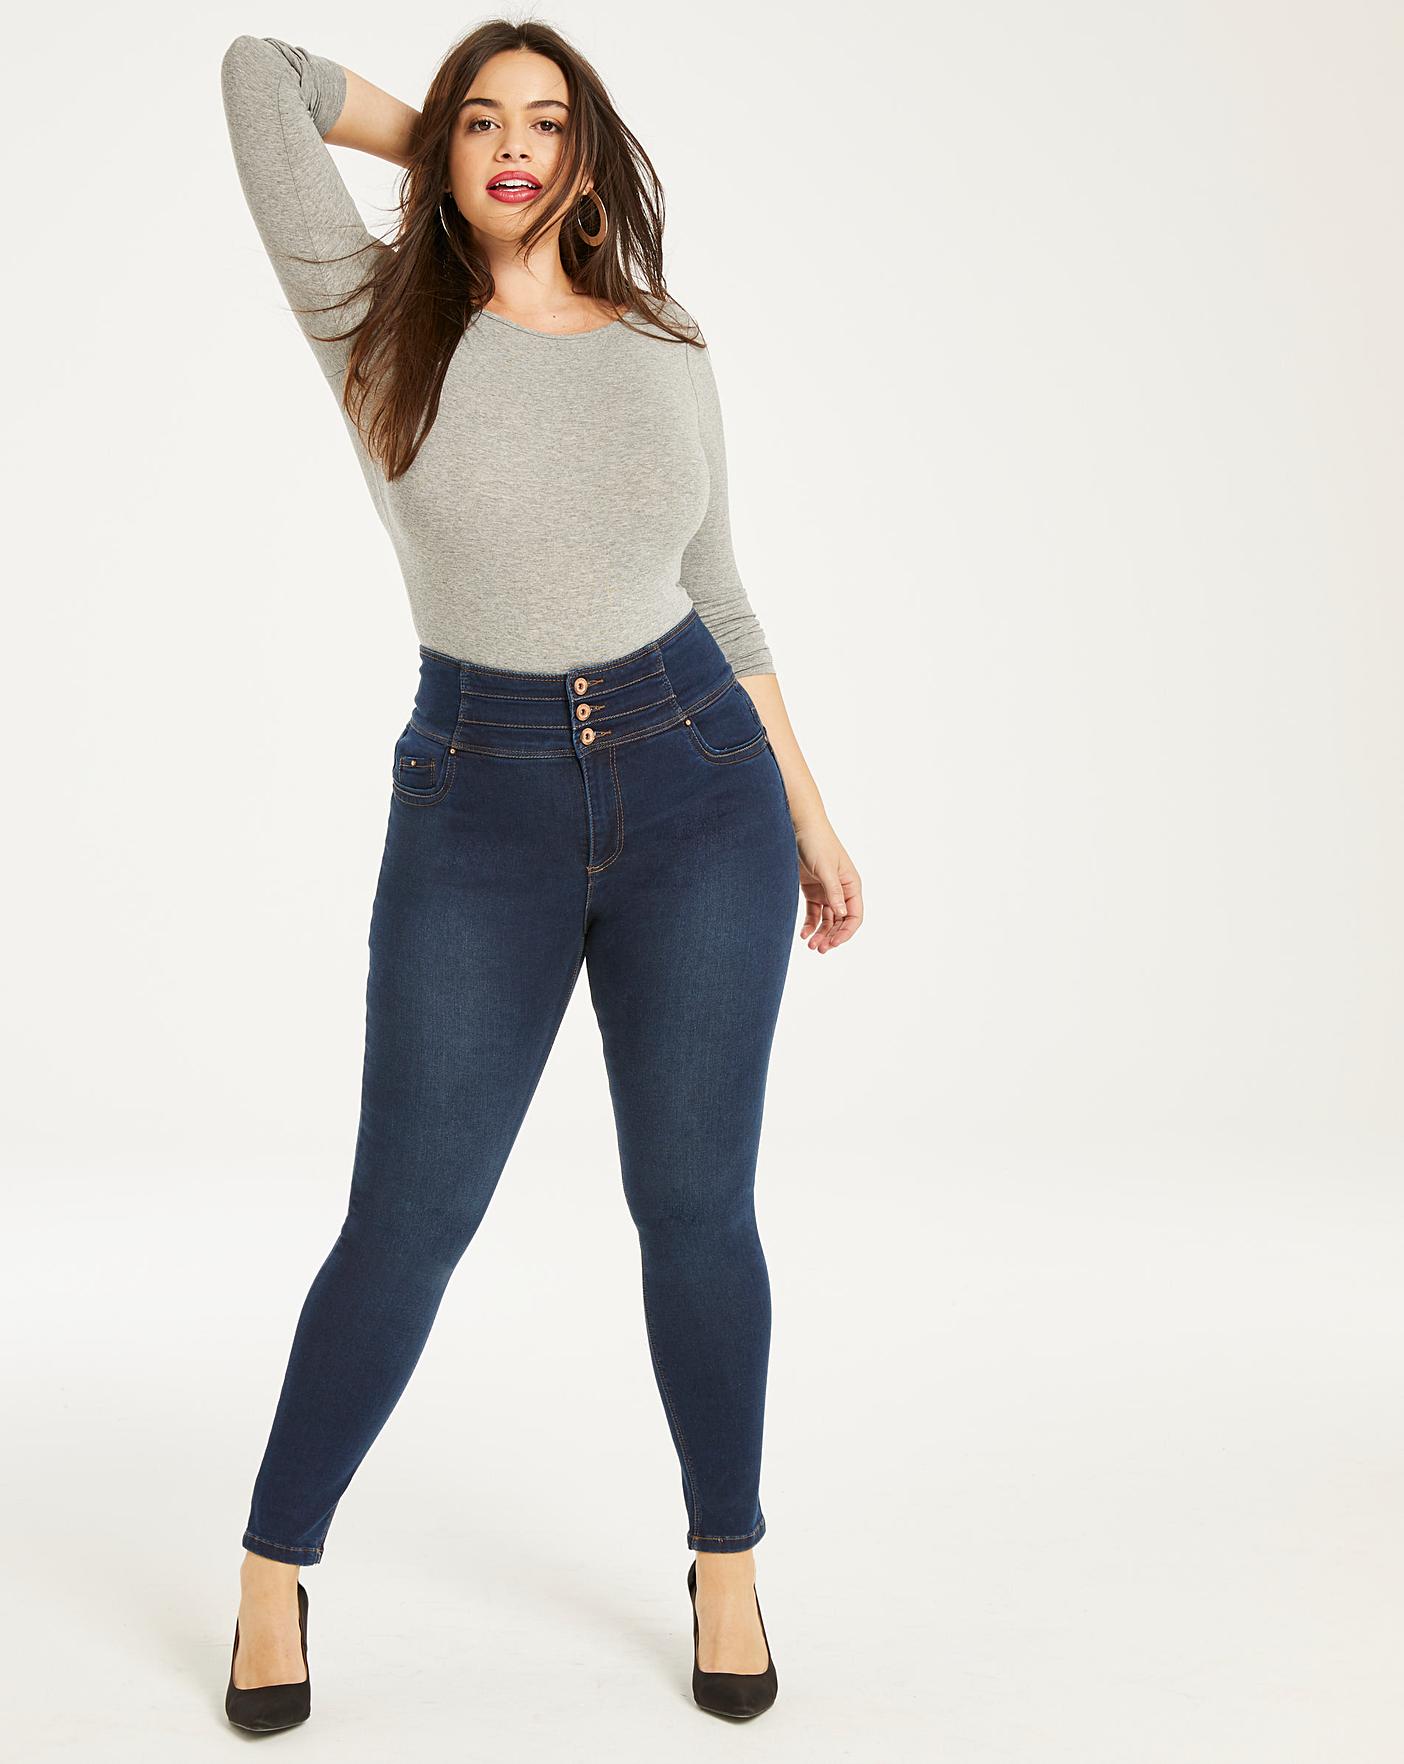 best skinny jeans for hourglass figure